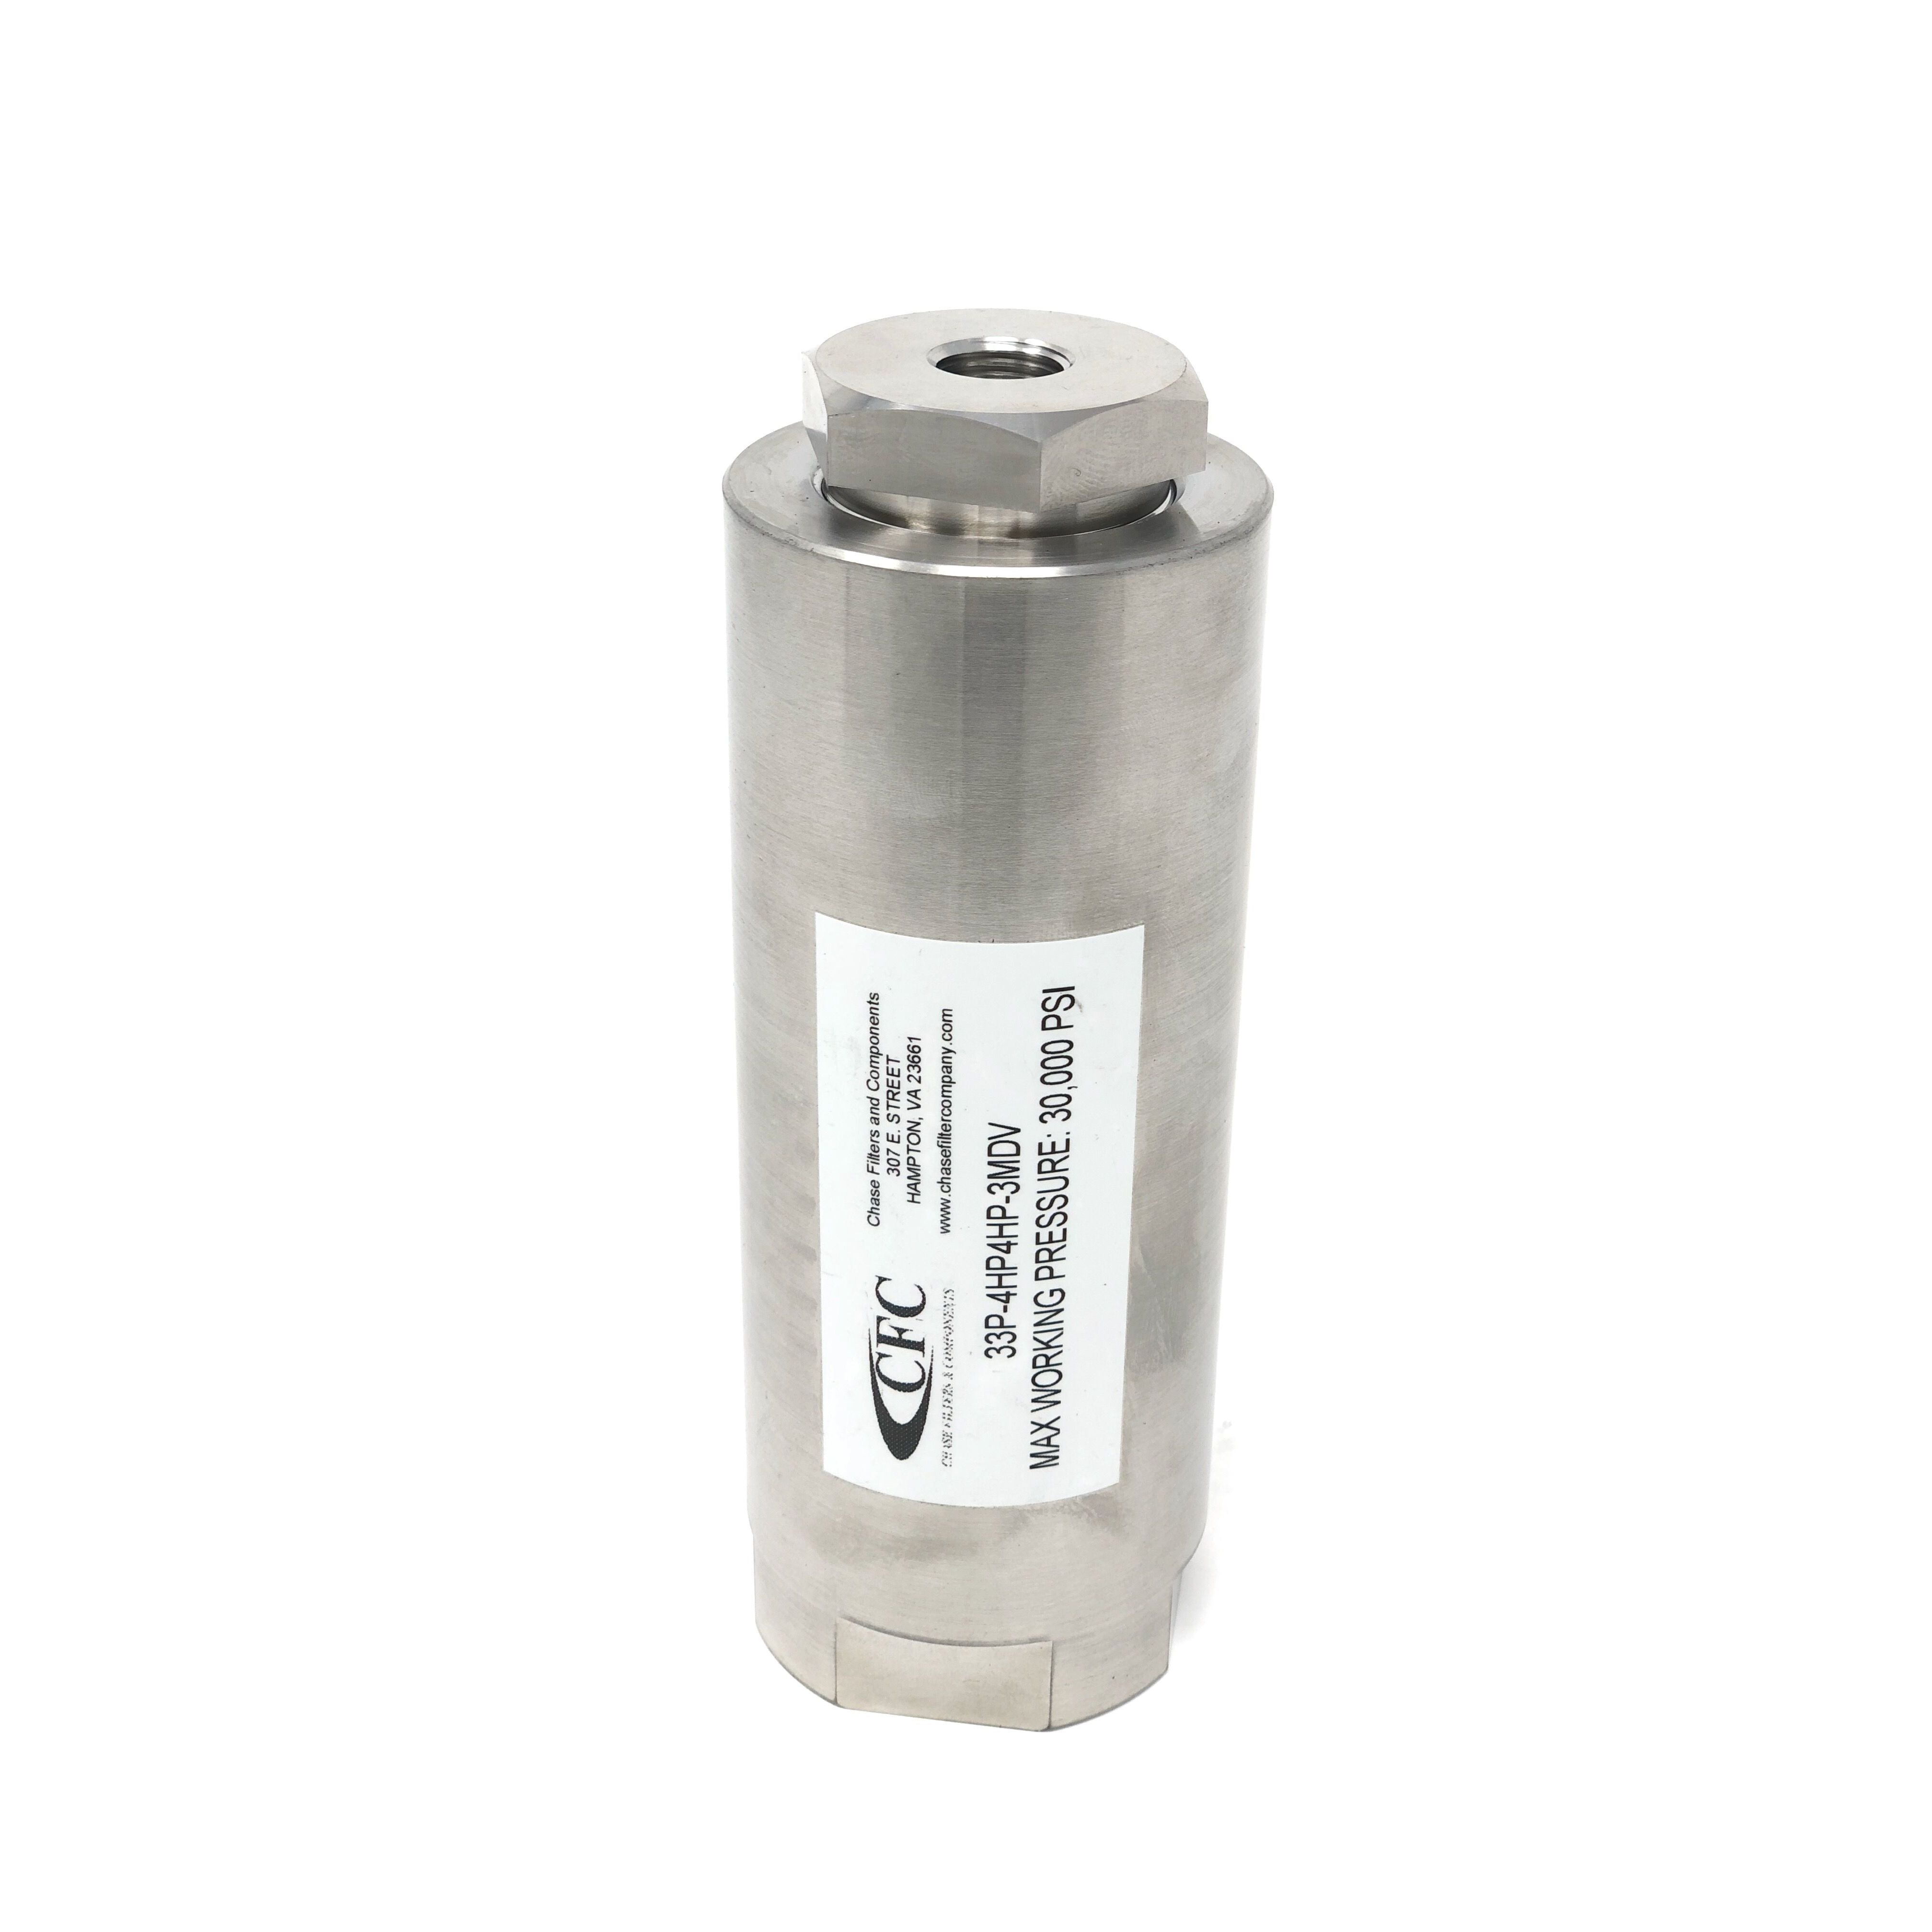 33P-6HP6HP-12MN : Chase Ultra High Pressure Inline Filter, 30000psi, 3/8" HP, 12 Micron, No Visual Indicator, No Bypass